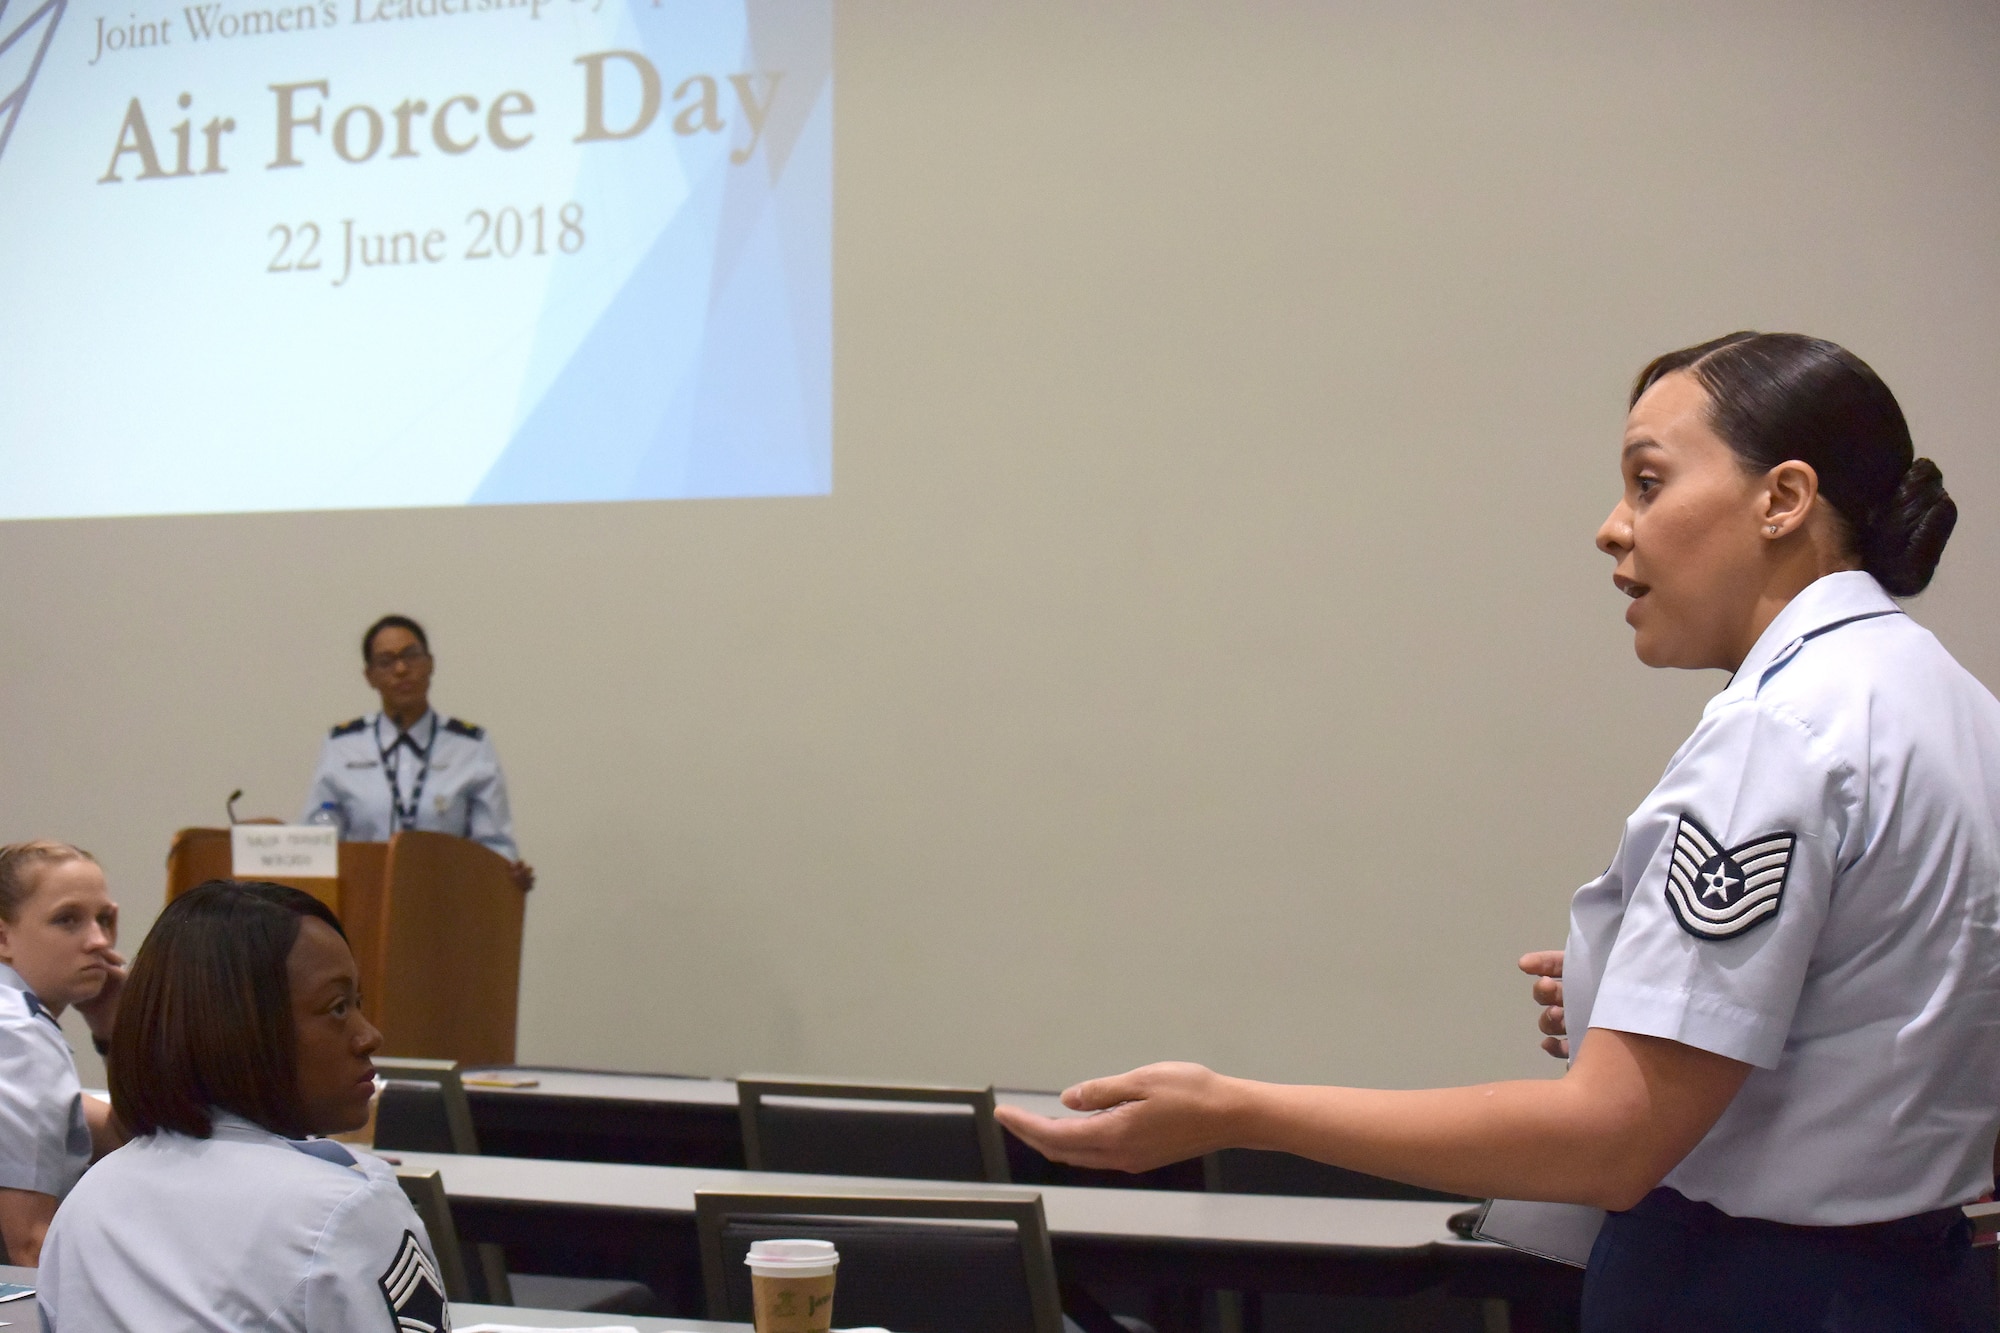 An attendee shares their experience at the 2018 Joint Women's Leadership Symposium June 22, 2018, in San Diego, Calif. This year’s theme “The Power Within You” featured practical workshops, joint discussion boards, an international speakers panel and service specific breakout sessions intended to promote personal and professional development. (U.S. Air Force photo by 1st Lt. Annabel Monroe)